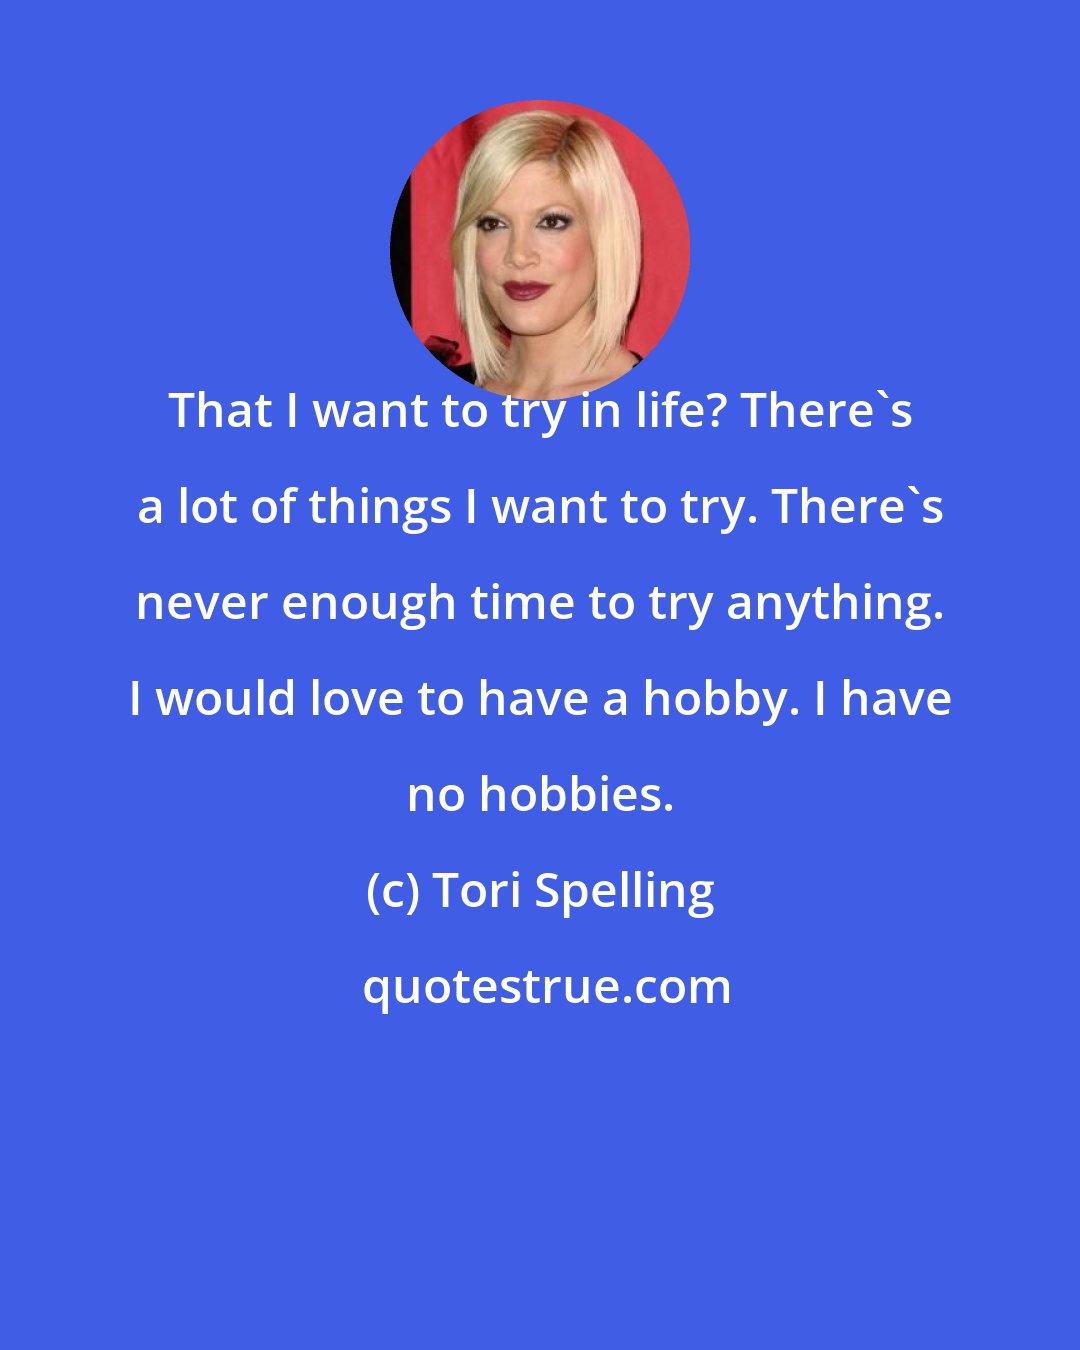 Tori Spelling: That I want to try in life? There's a lot of things I want to try. There's never enough time to try anything. I would love to have a hobby. I have no hobbies.